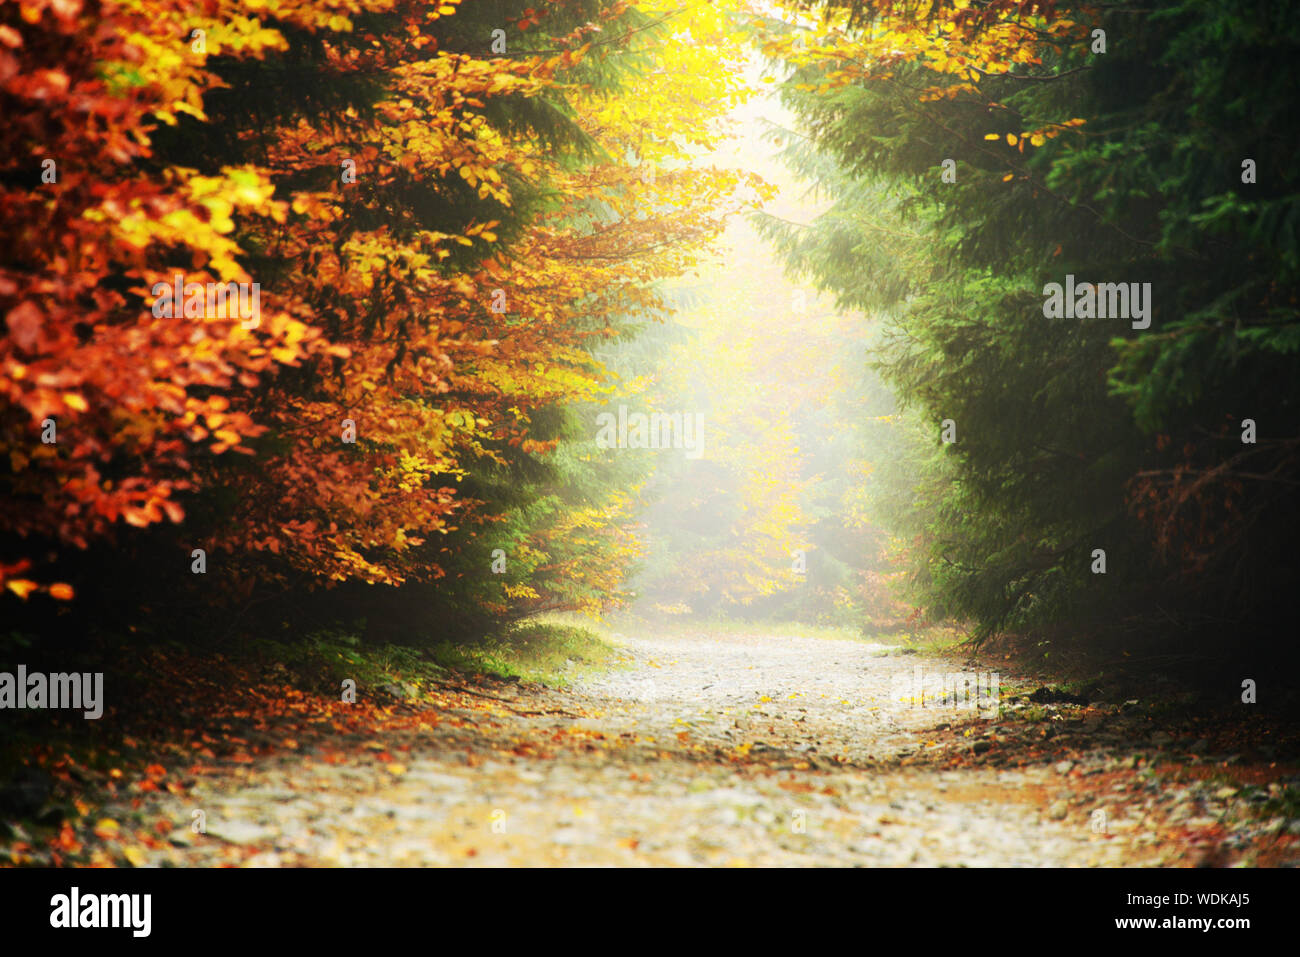 Surface Level Of Road Amidst Autumn Trees In Forest Stock Photo